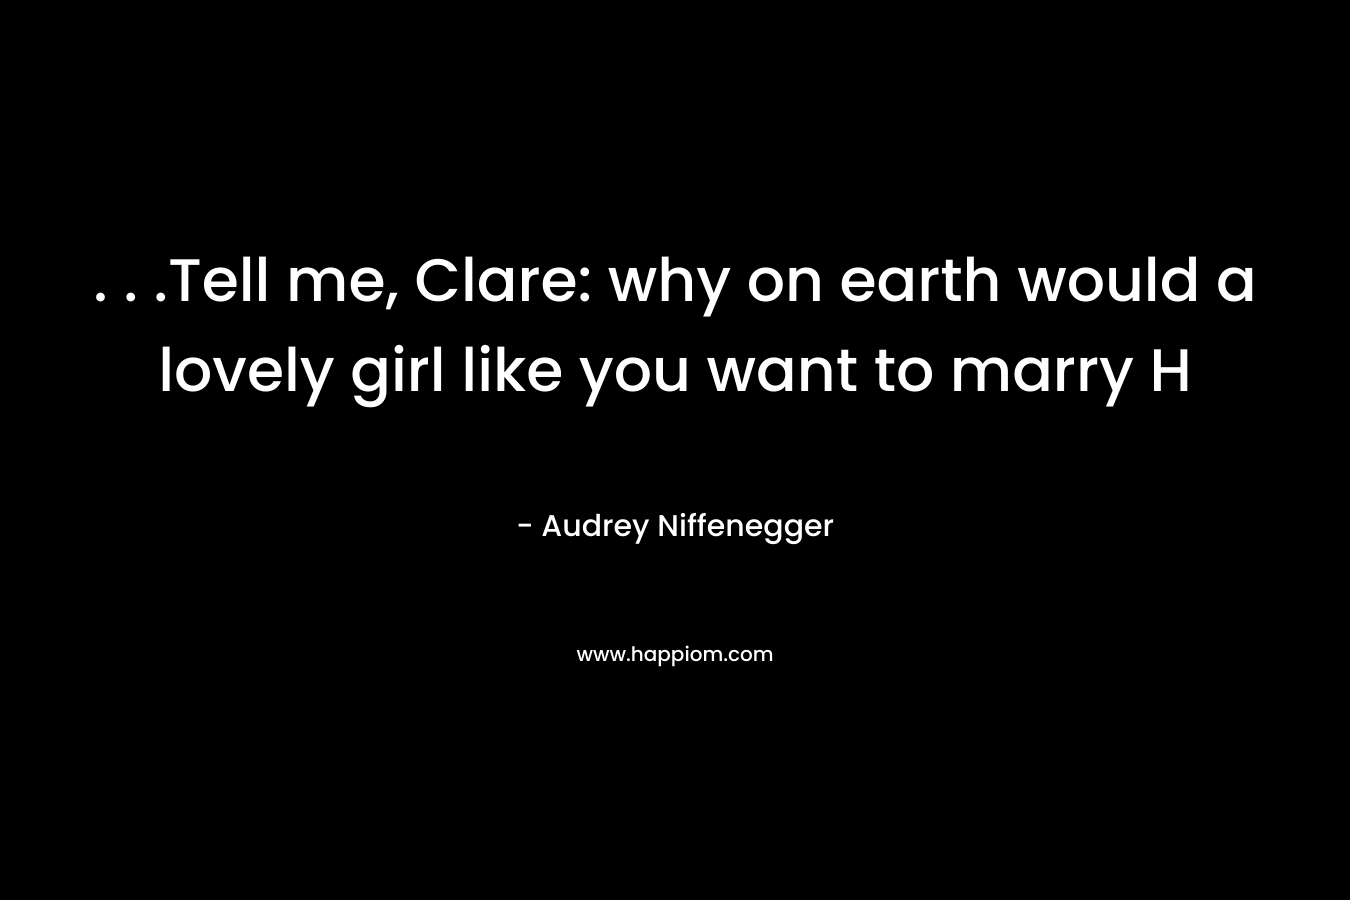 . . .Tell me, Clare: why on earth would a lovely girl like you want to marry H – Audrey Niffenegger